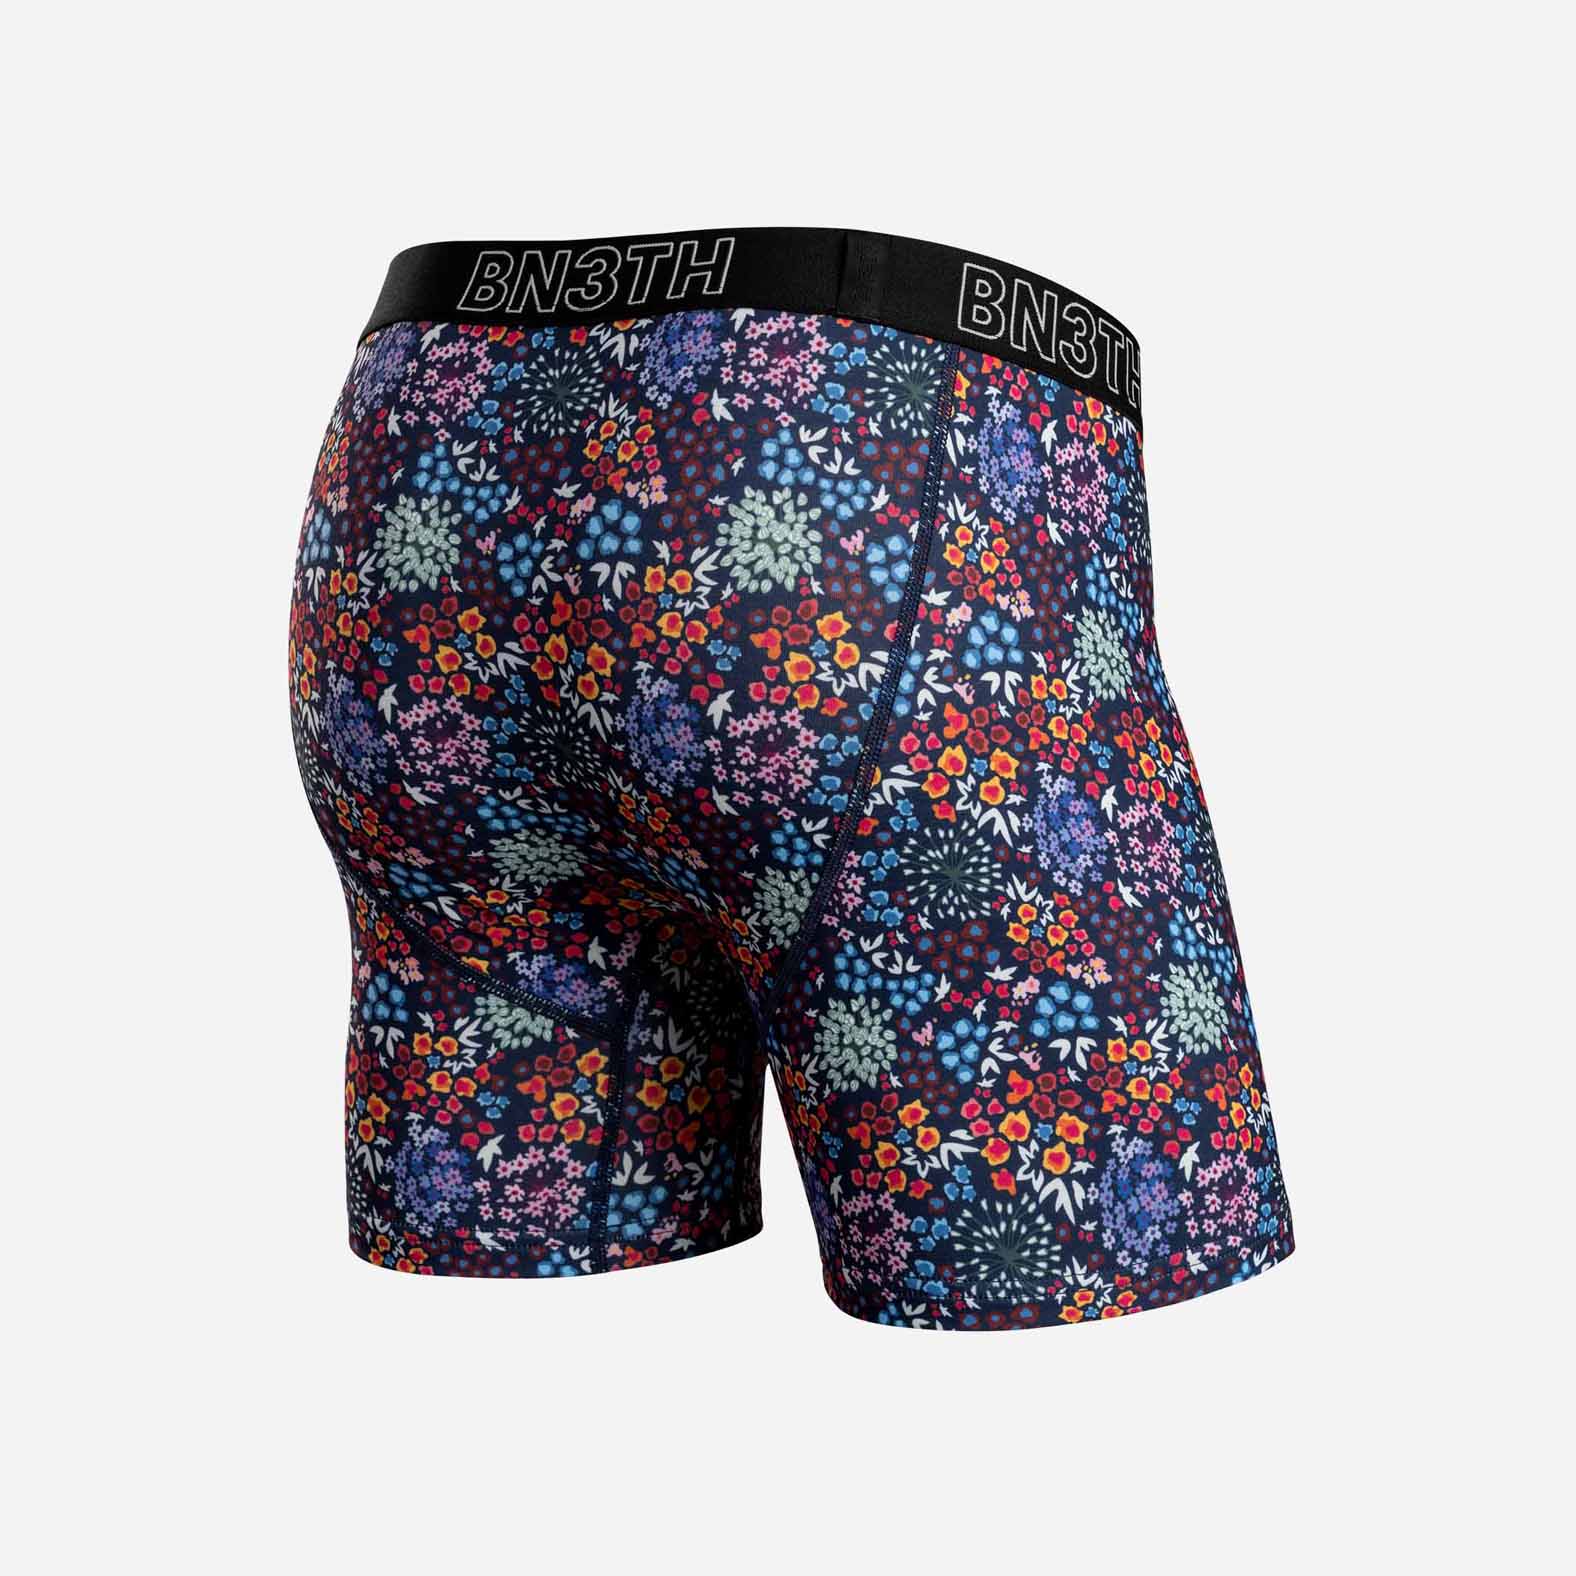 INCEPTION BOXER BRIEF: FLORAL FIELD NAVAL